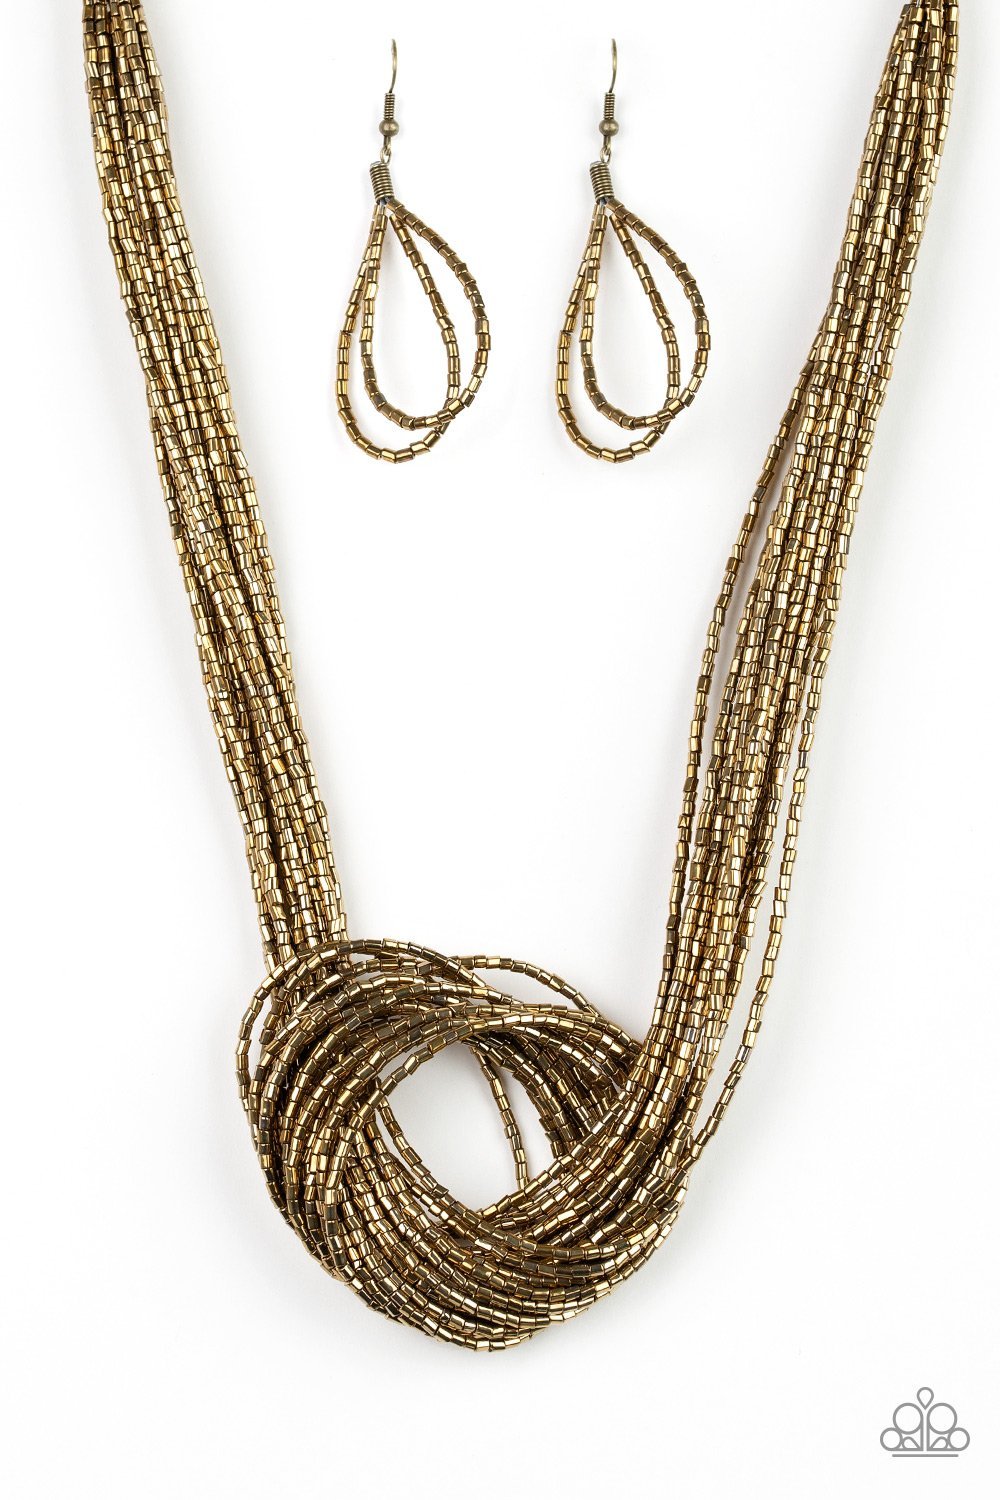 Knotted Knockout - brass seed bead necklace